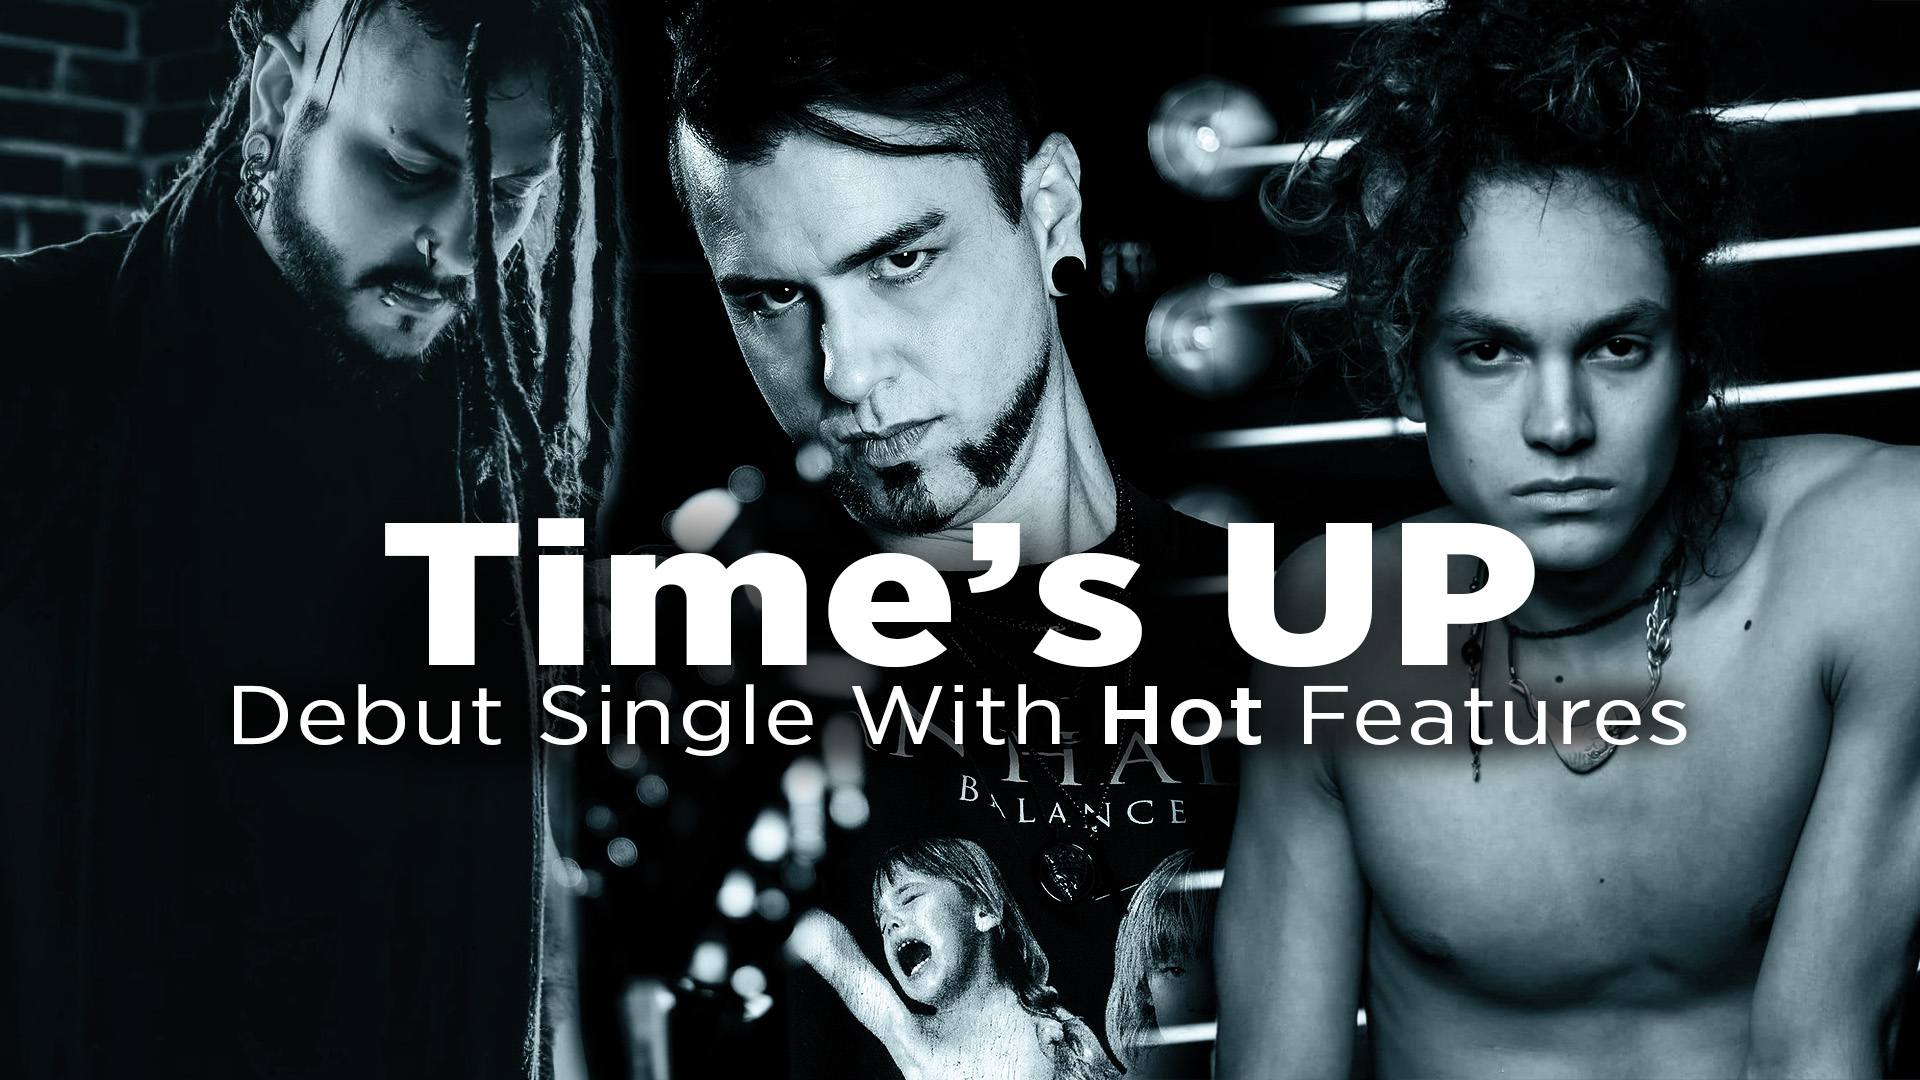 Time's Up - Debut Single With Hot Features